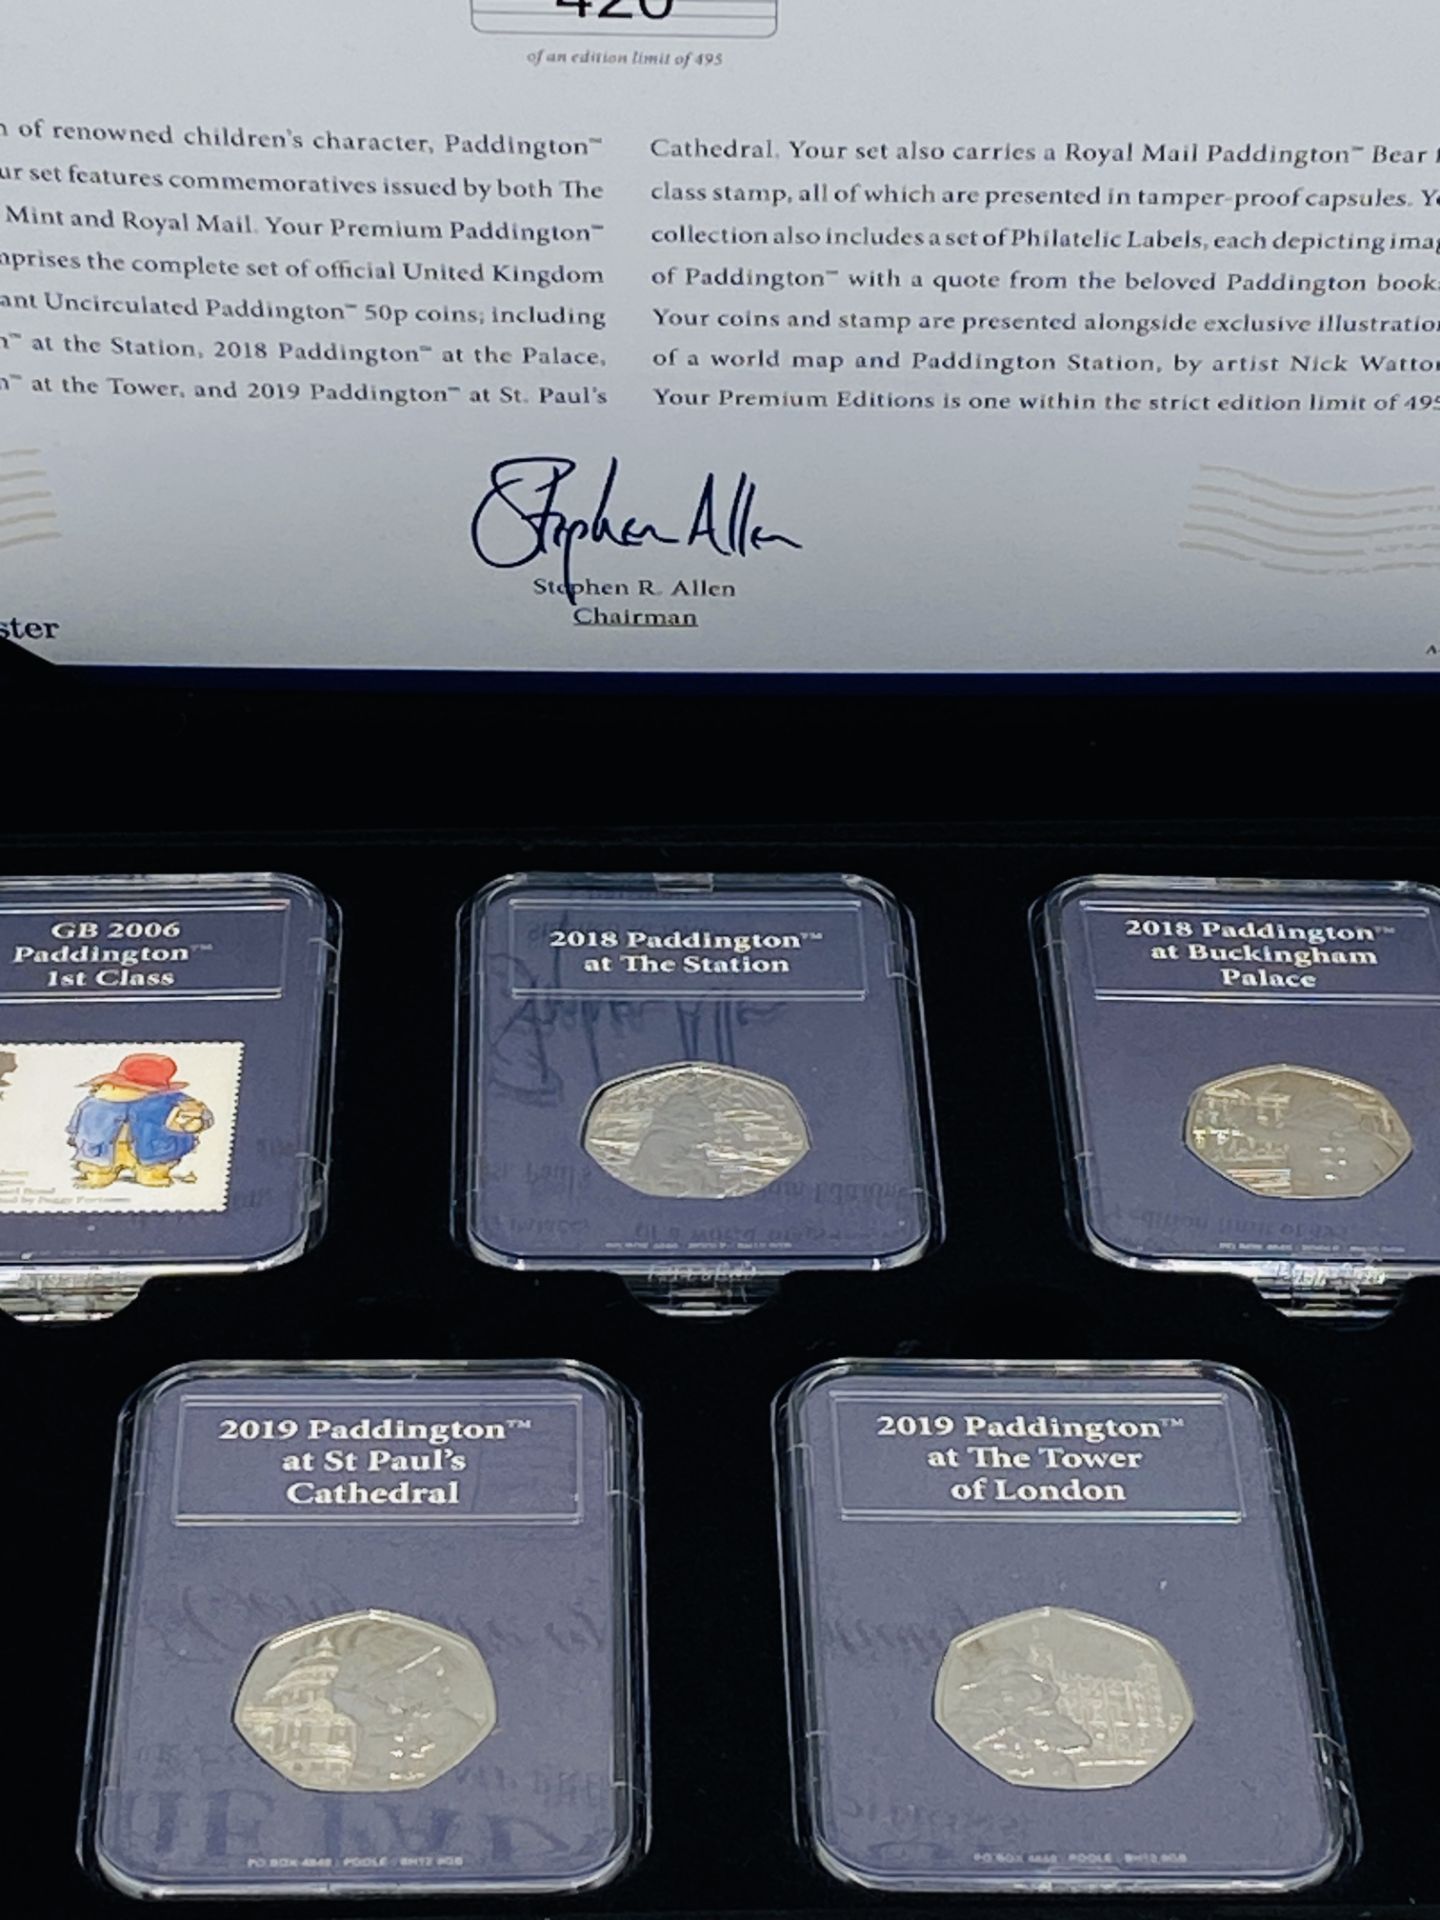 Westminster Limited Edition Paddington Coin and Stamp Capsule collection - Bild 2 aus 3